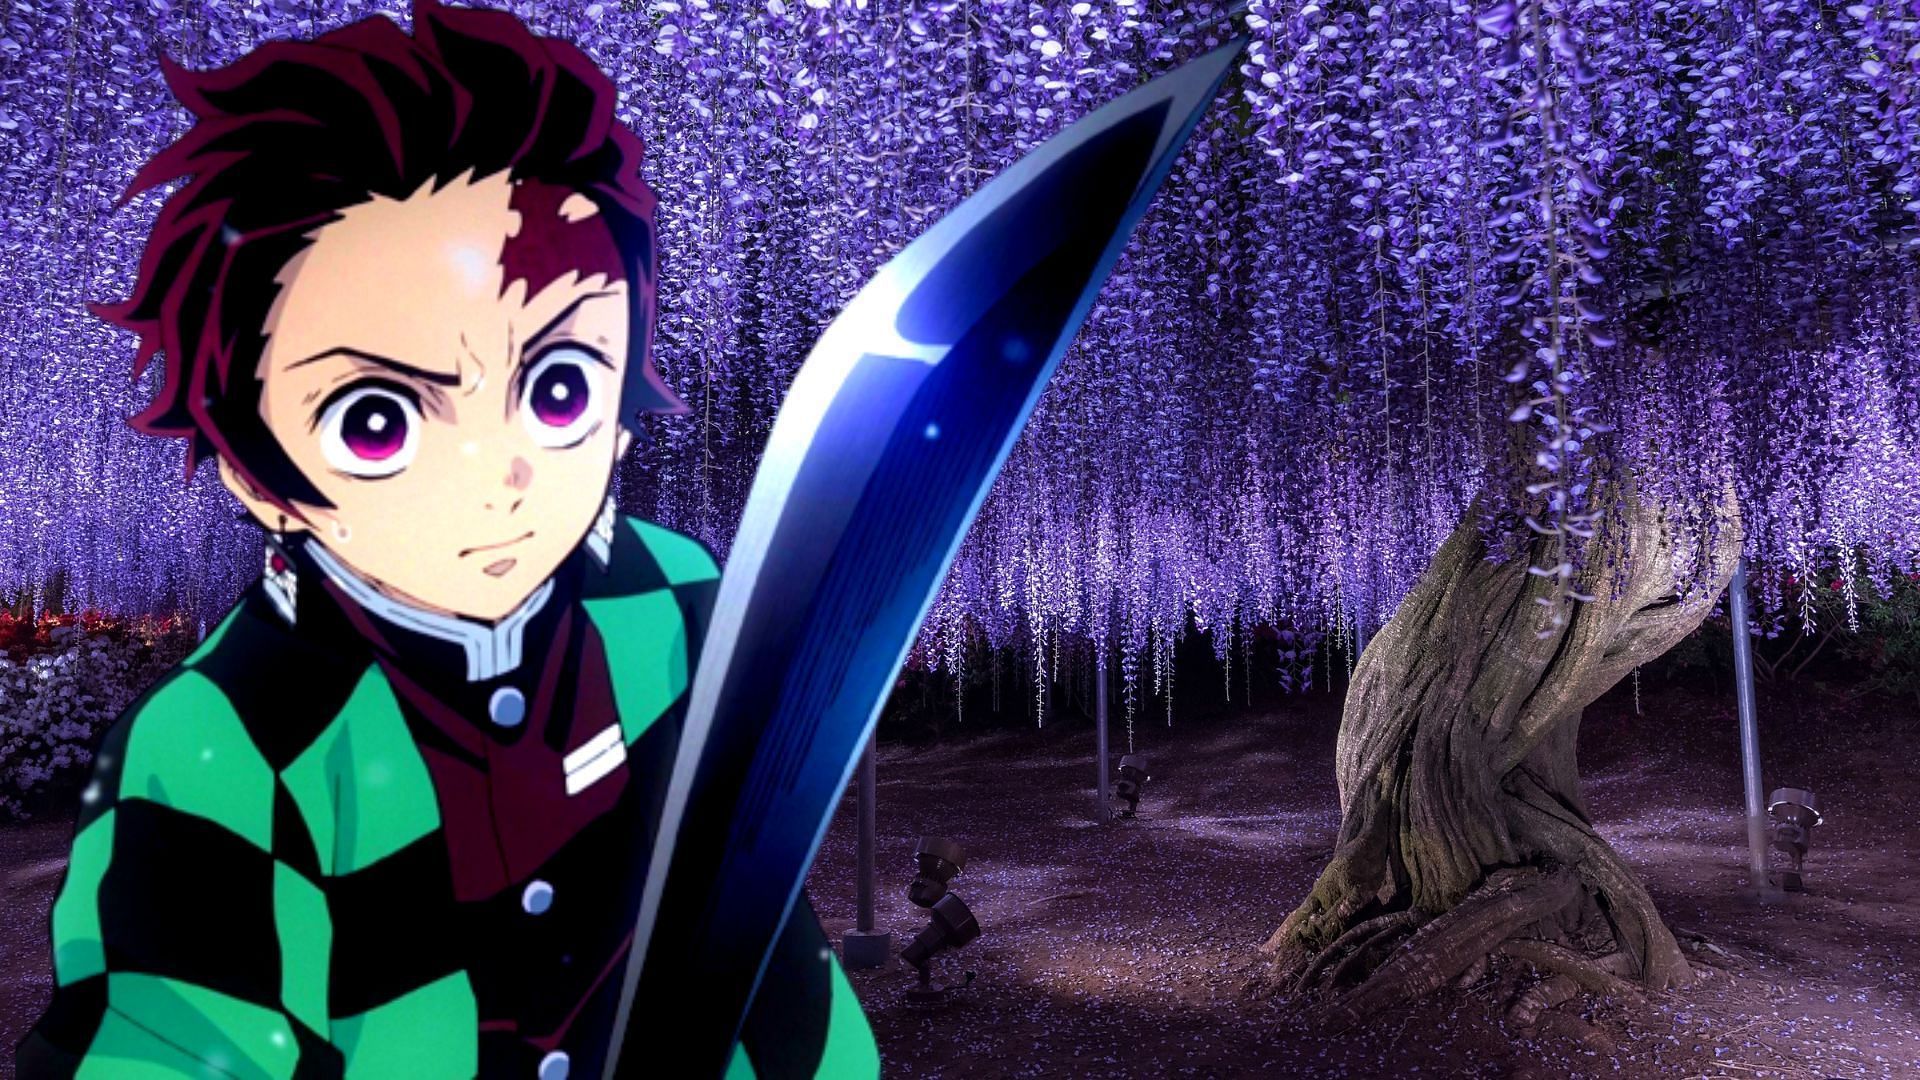 Is Demon Slayer based on a true story? 8 facts about the show most people  don't know